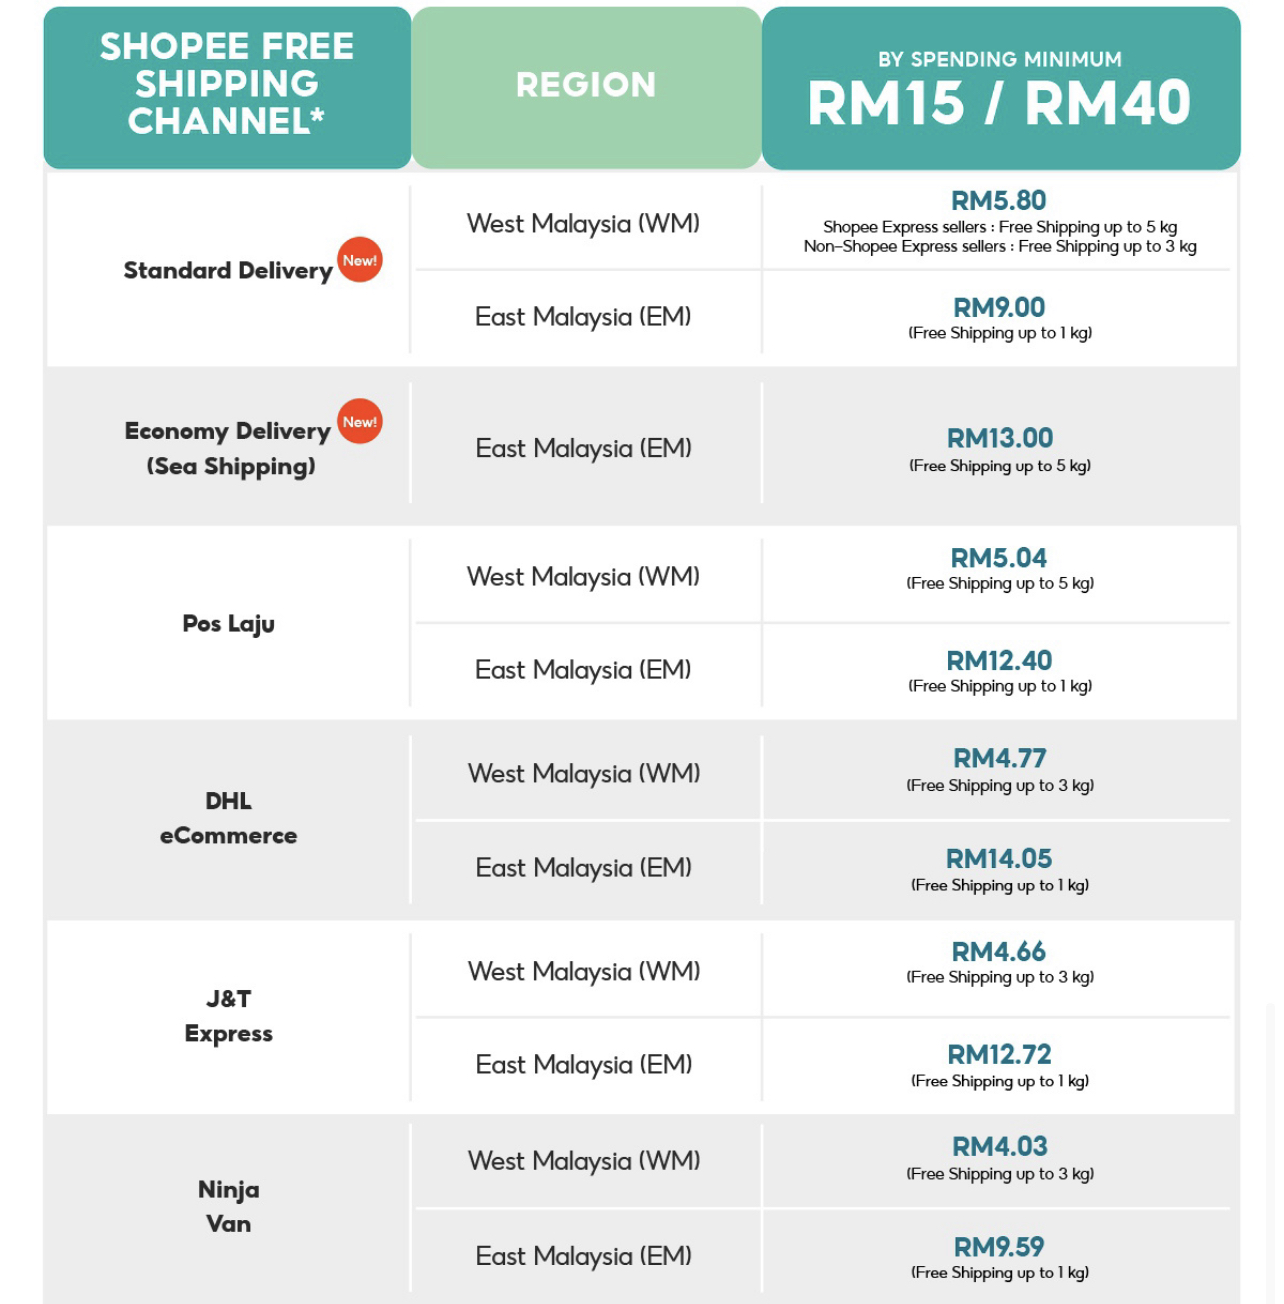 How Much Is Shipping Fee Shopee Seller in Malaysia? - Ginee